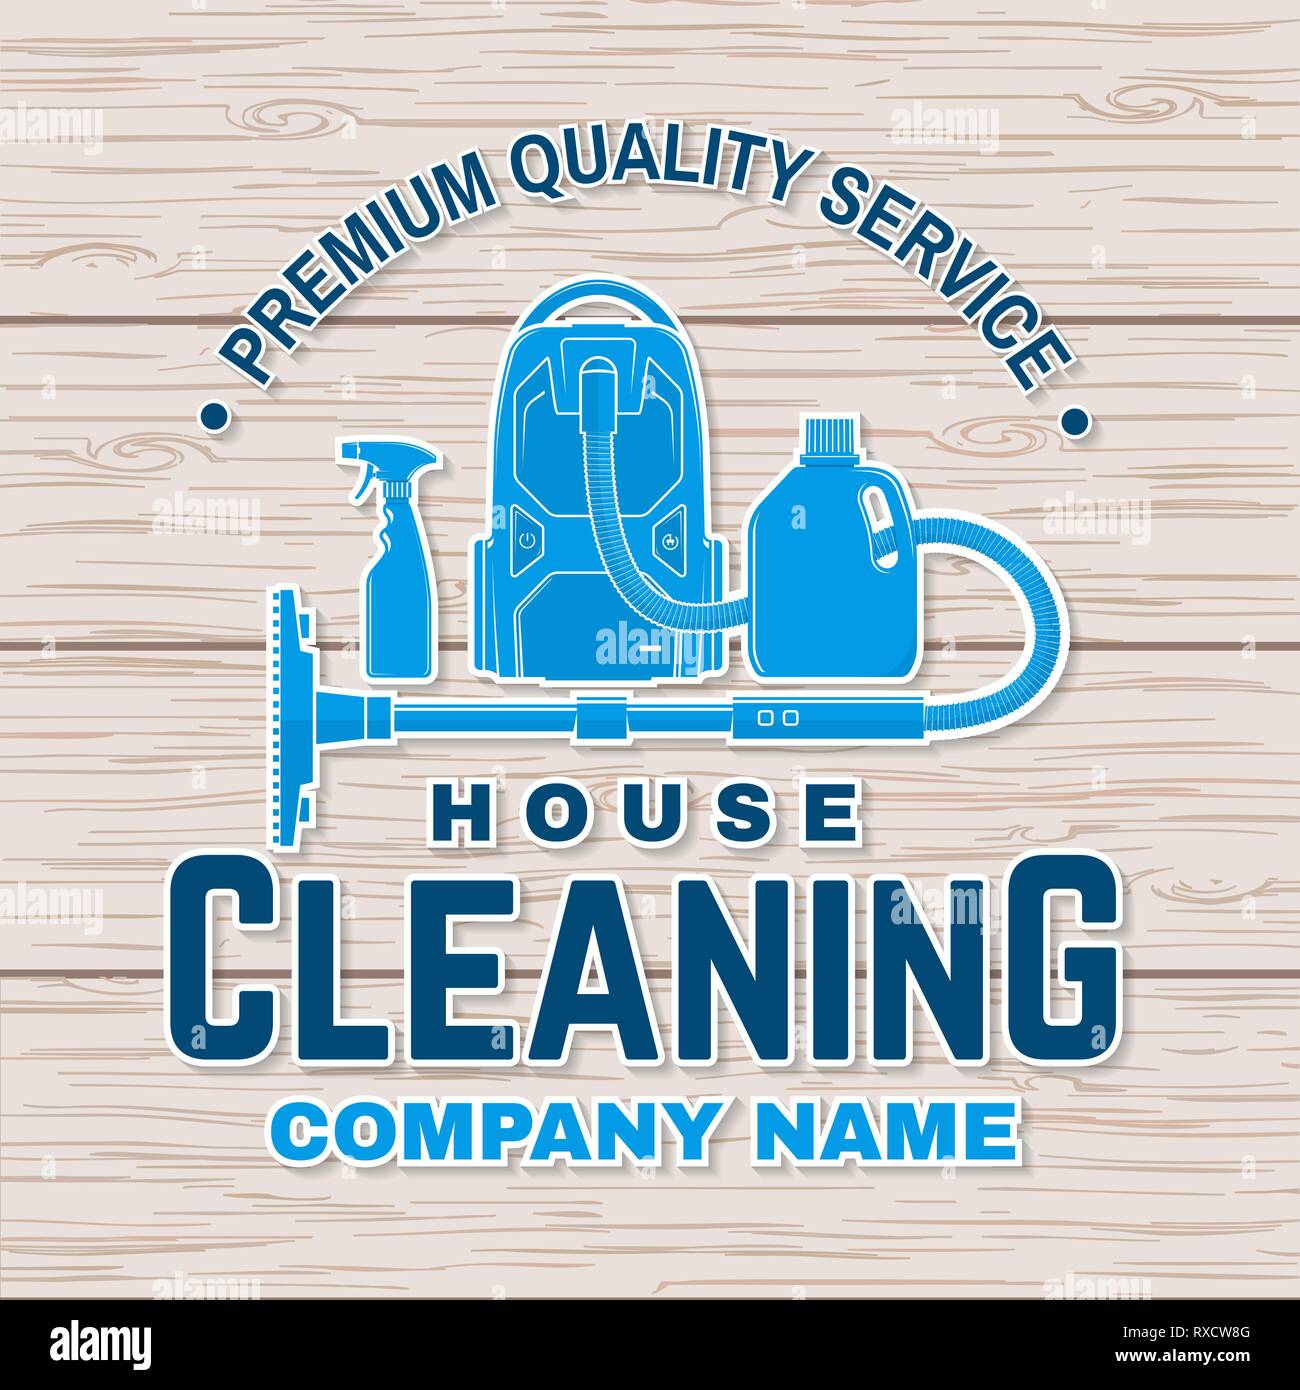 Cleaning company badge, emblem. Vector illustration. Concept for sticker, print, stamp or patch. Vintage typography design with cleaning equipments. Cleaning service sign for company related business Stock Vector